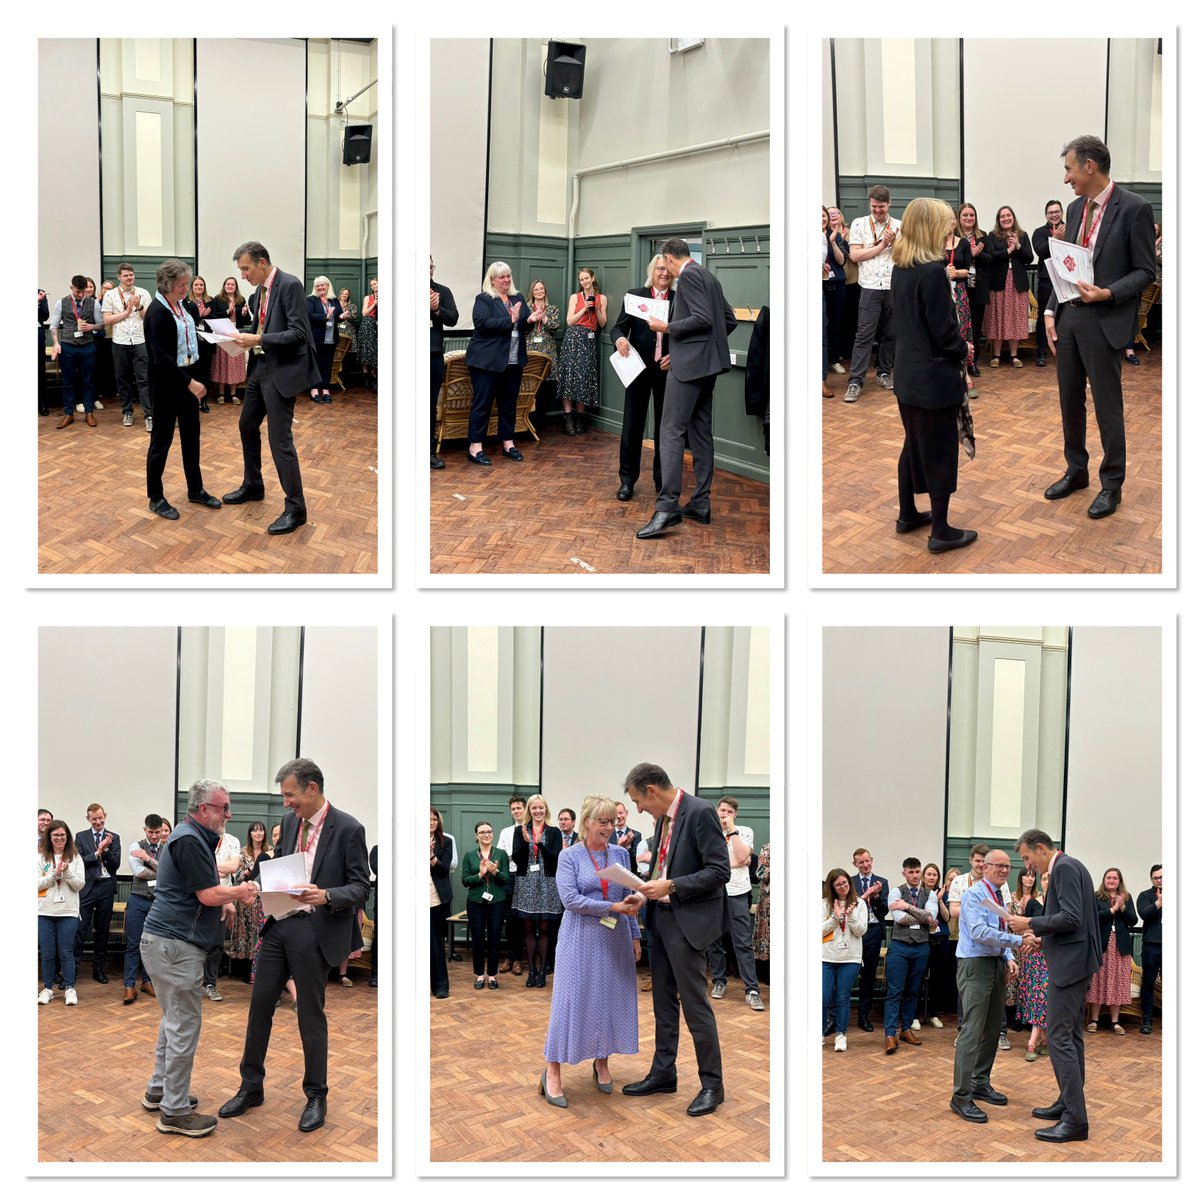 We celebrated colleagues with the Trust Long Service award. CEO of the Trust Richard Sherriff gave Mrs Winters, Mr Weston, Mrs Weston, Mr Mungovin, Mrs Bennett & Mr Moore their certificates & words of appreciation for contributions to our school totalling 185 yrs between them!